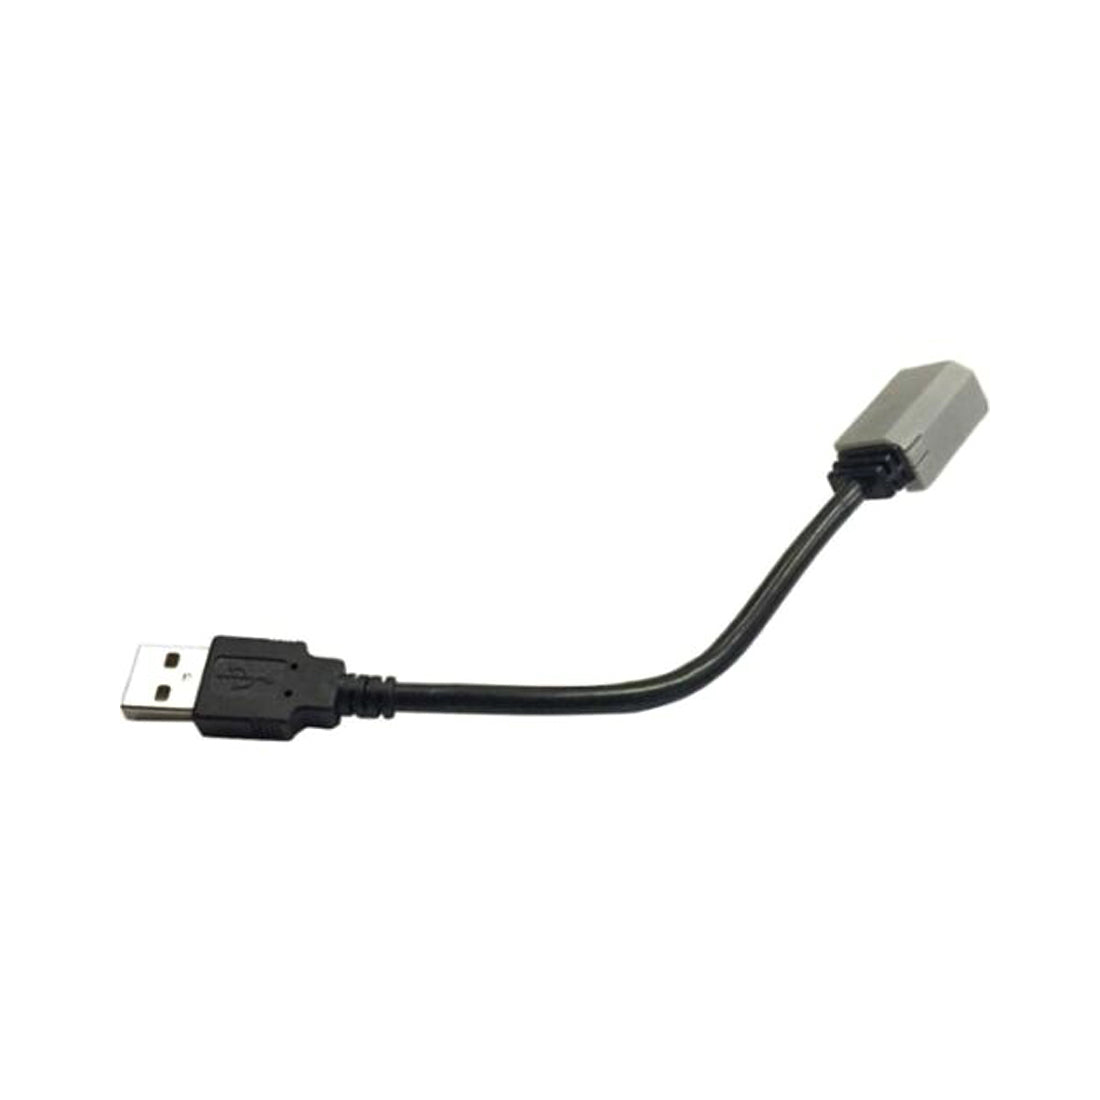 iDatalink Maestro ACC-USB1 USB Adapter Cable for 2006-Up Chrysler GM Ford